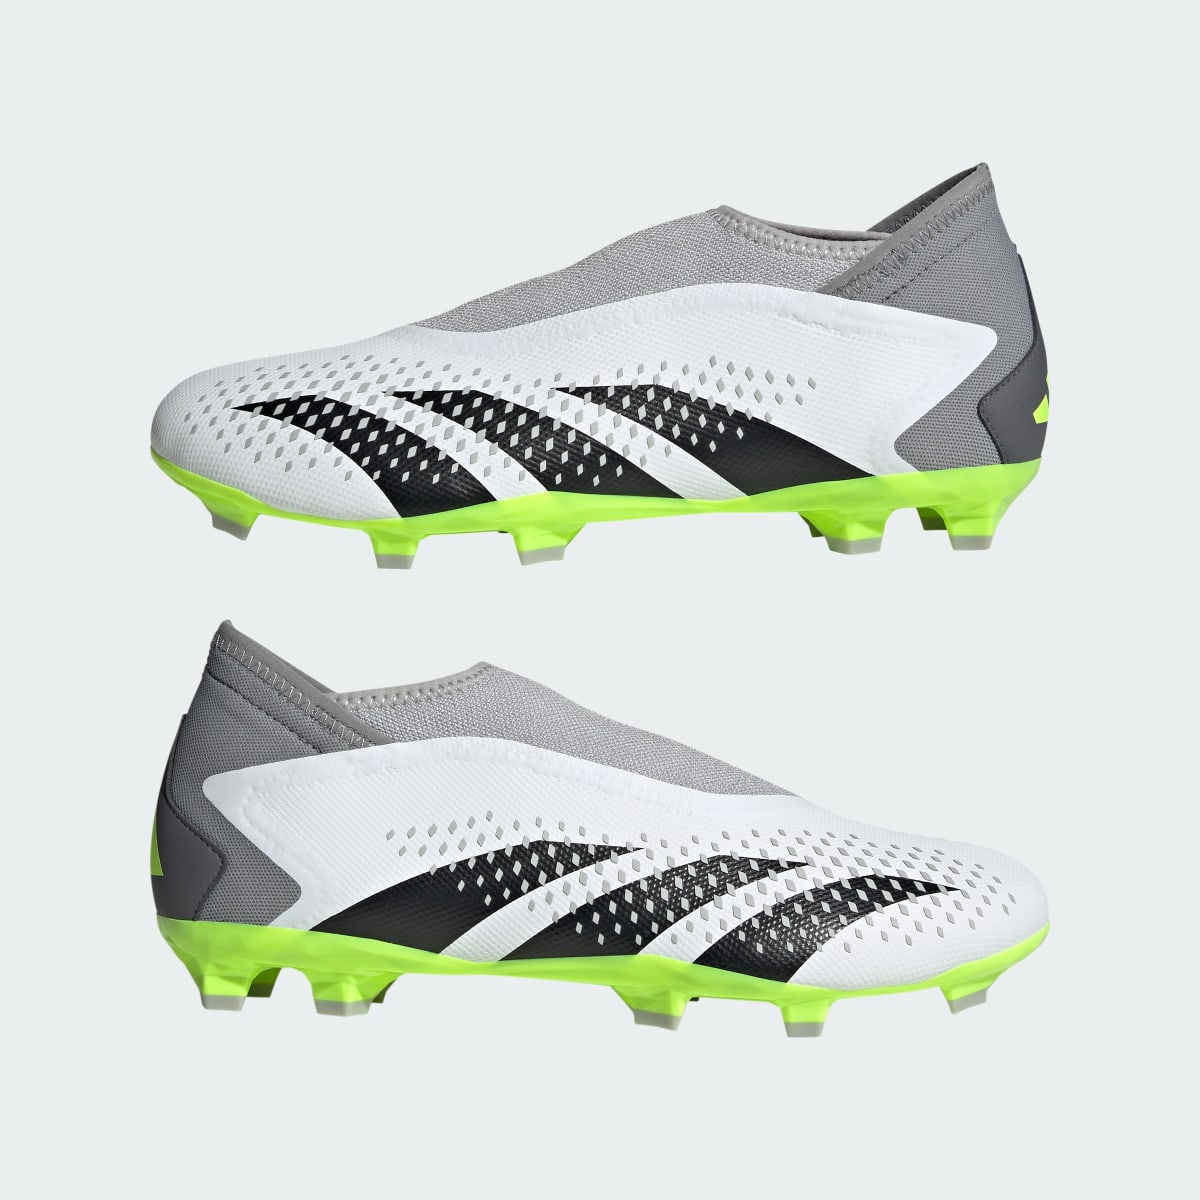 Adidas Predator Accuracy.3 Laceless Firm Ground Cleats. 8